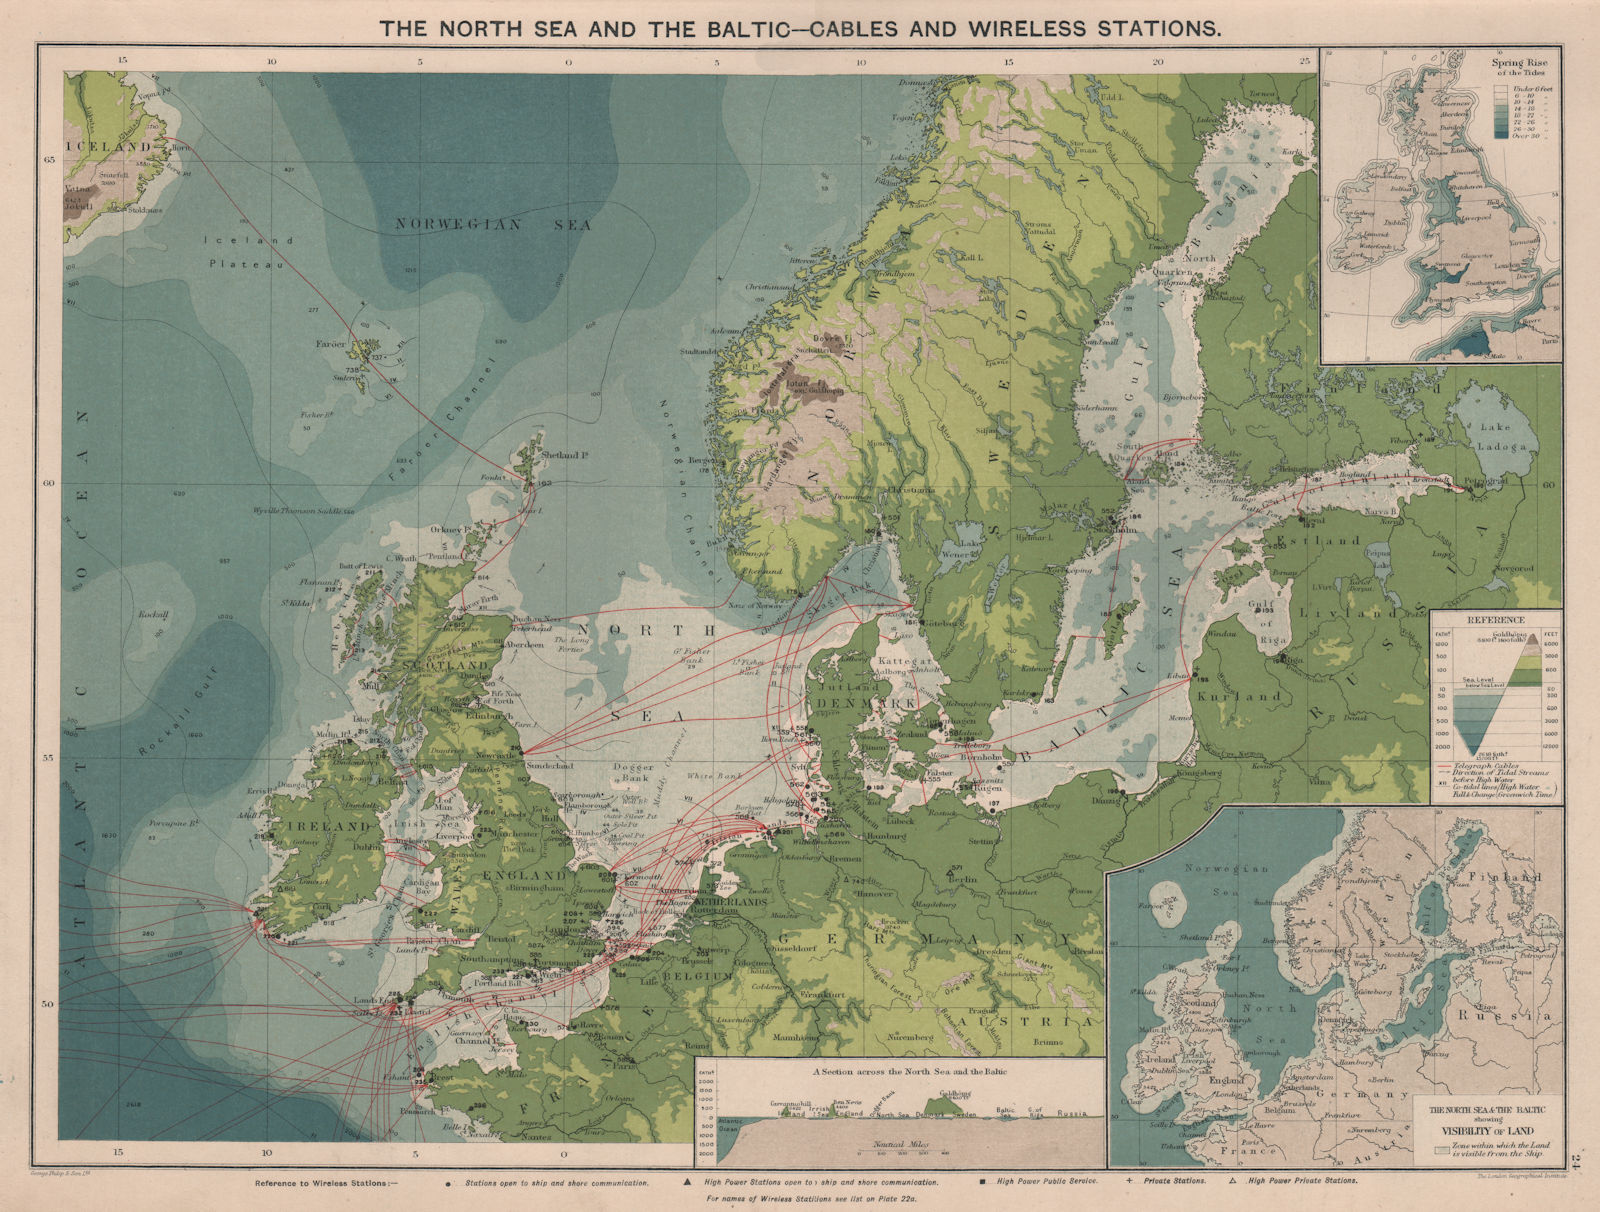 North Sea & Baltic. Cables & Wireless Stations Land visibility Section 1918 map